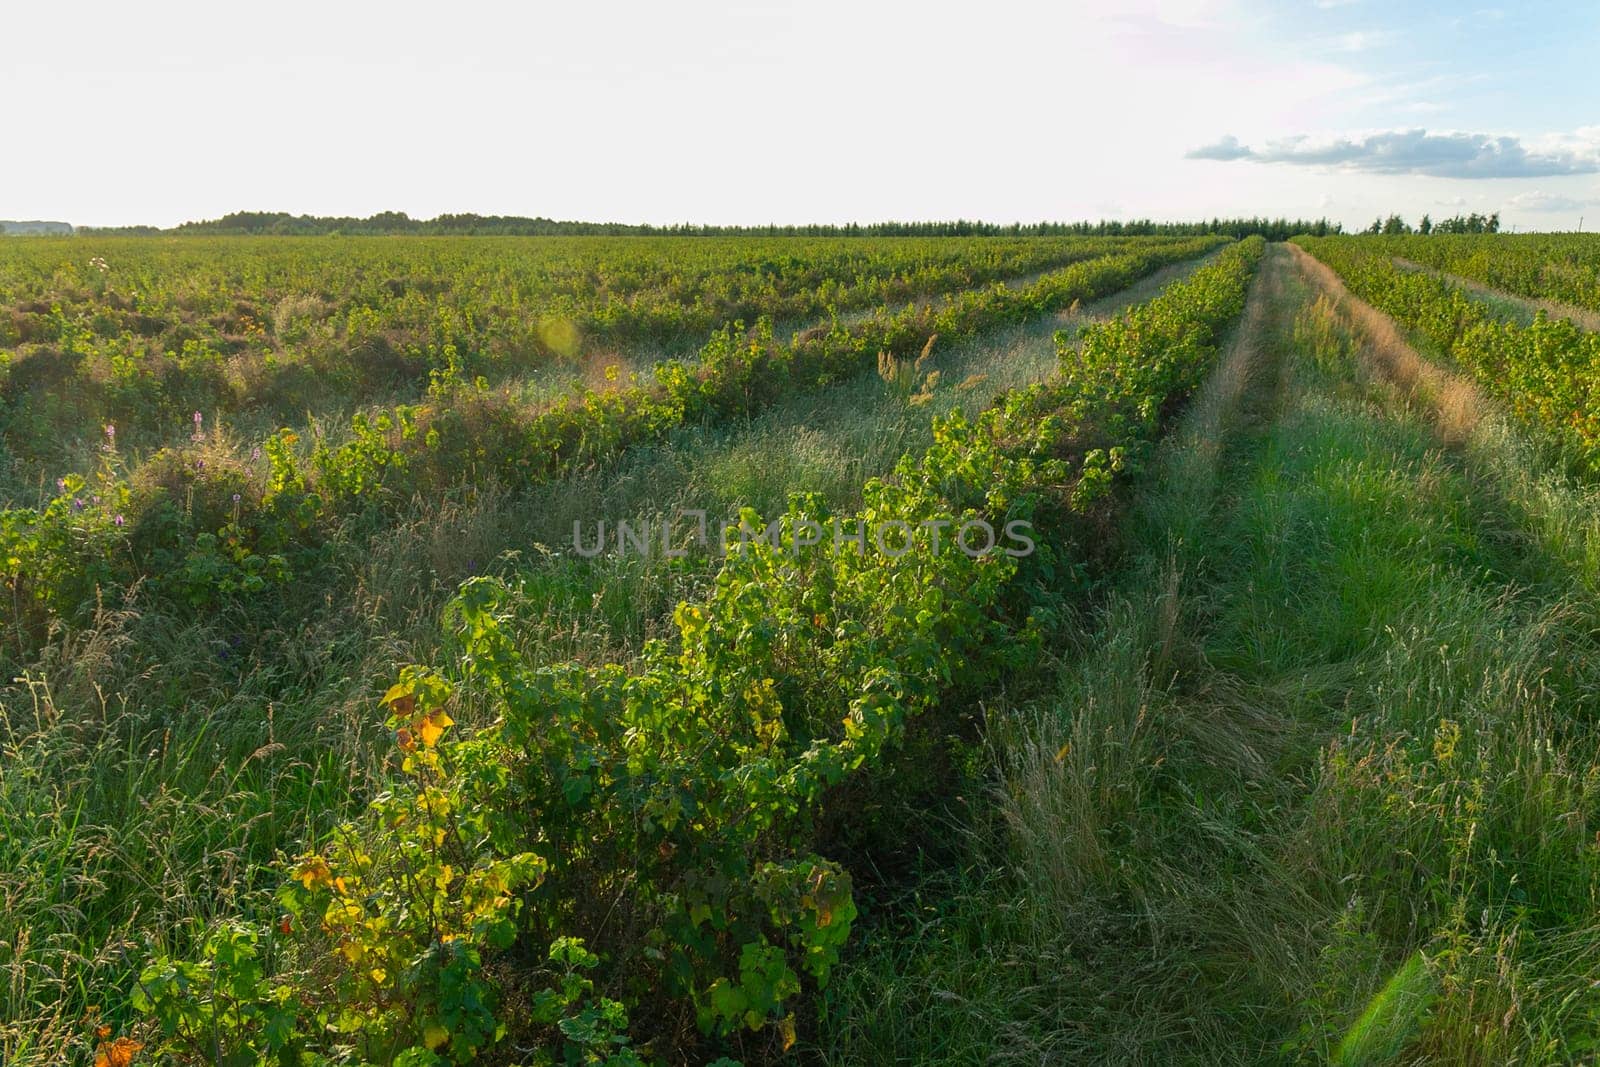 Rows of currant bush on the agricultural field. Currant bushes planted in even rows in the field. Ecological fruit plantation concpet. Black currant on farmland in sunny day.